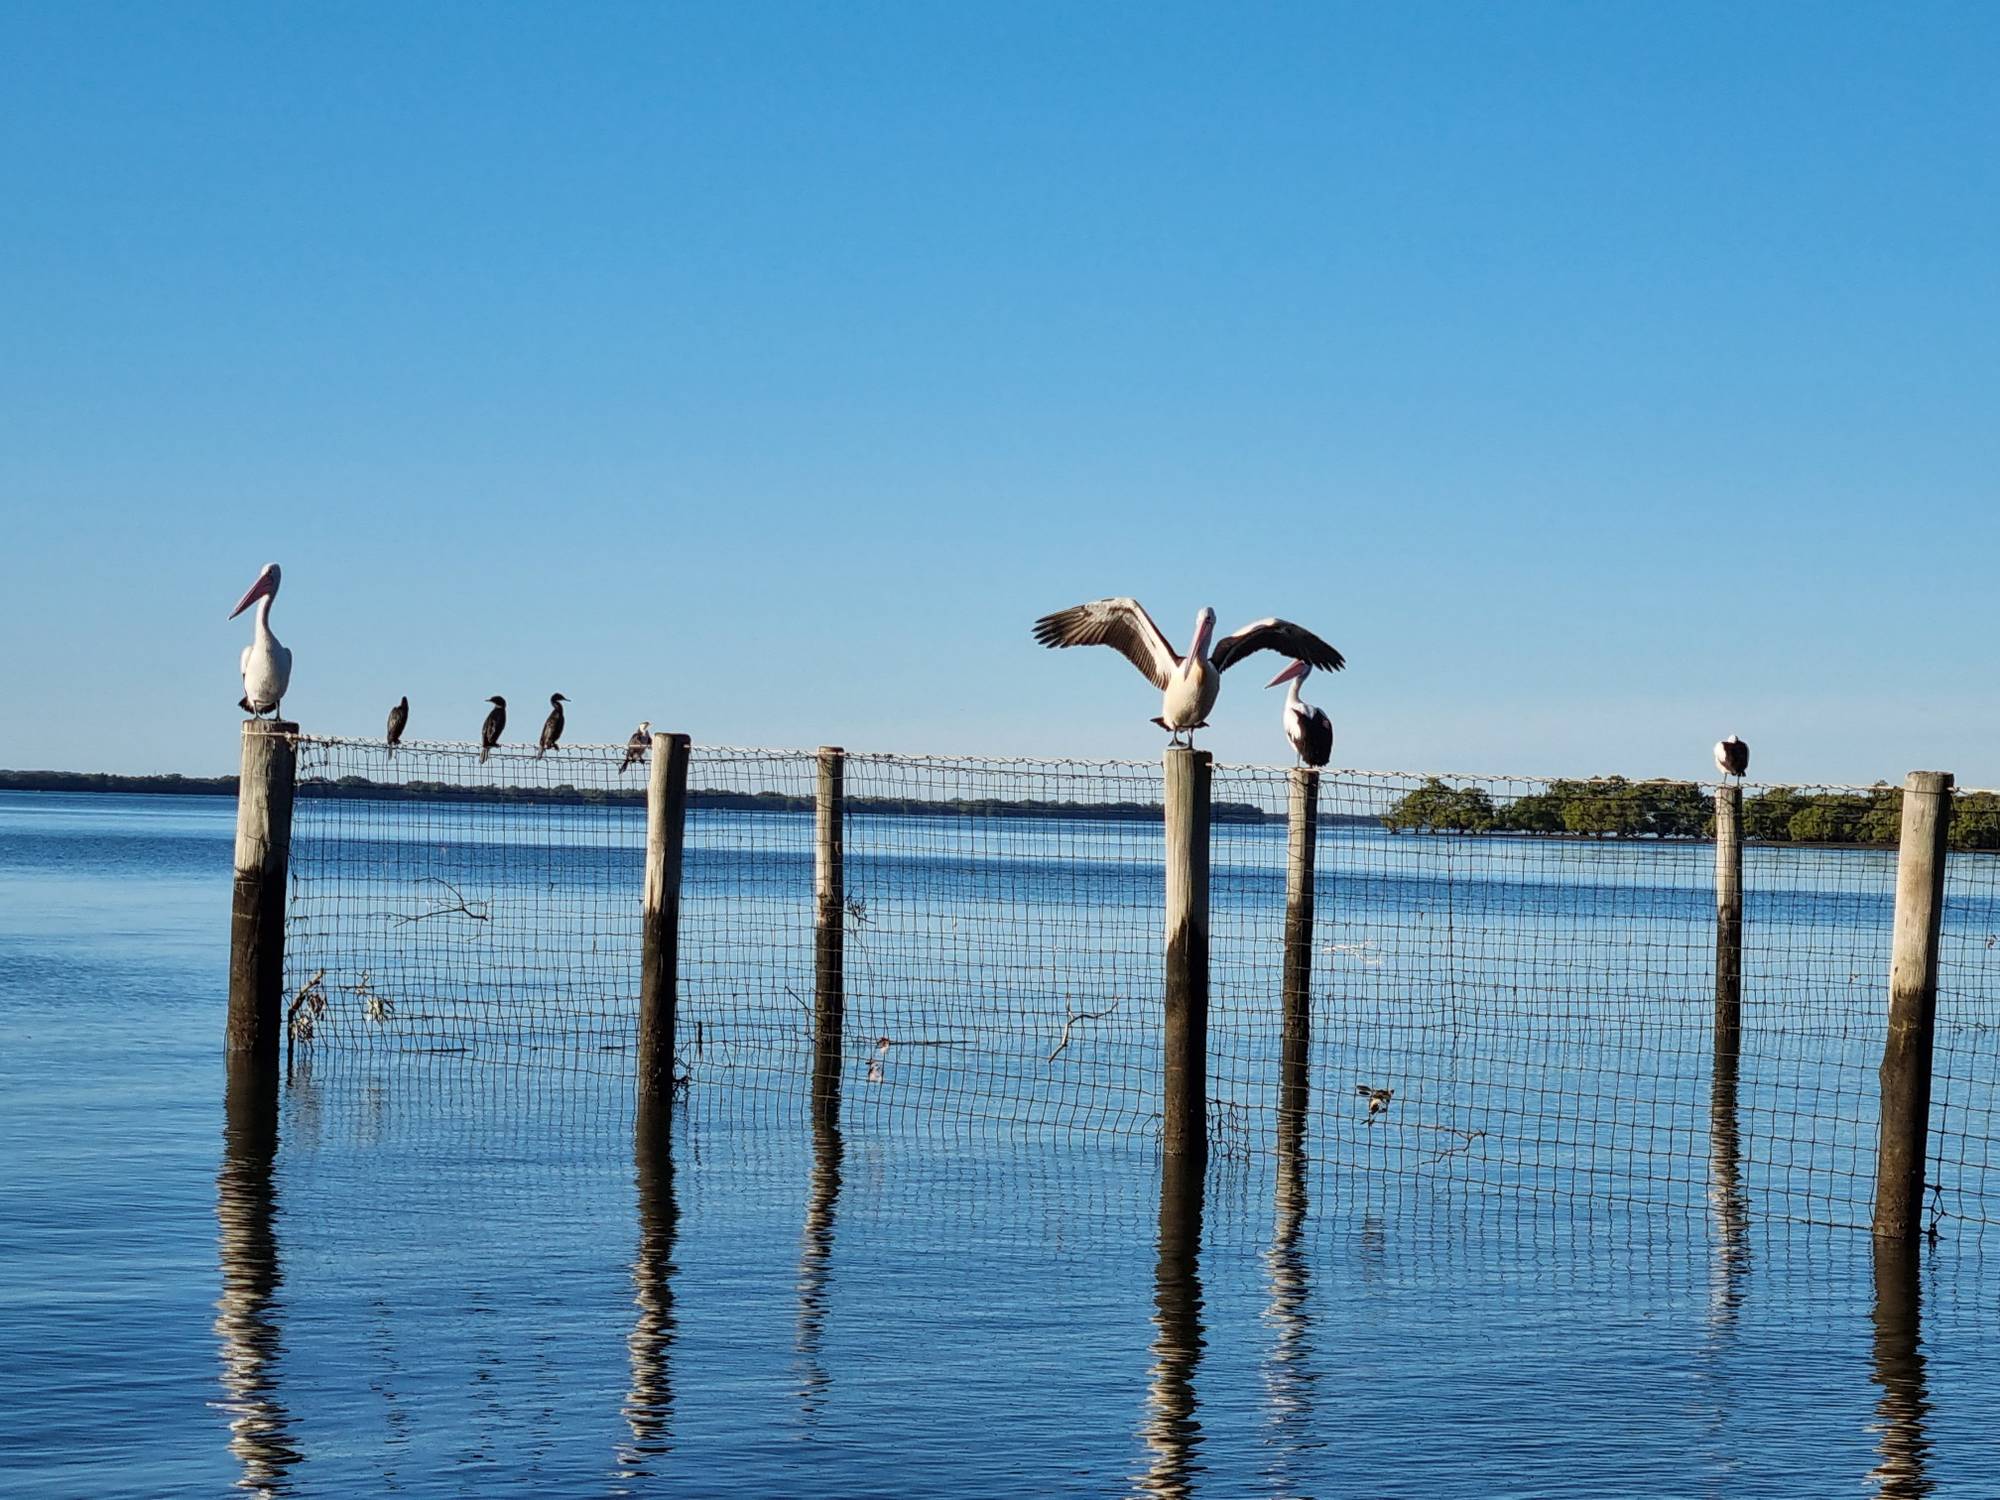 The pelican and Darts seem to like the posts, Must be a decent spot to see any fish that are about.